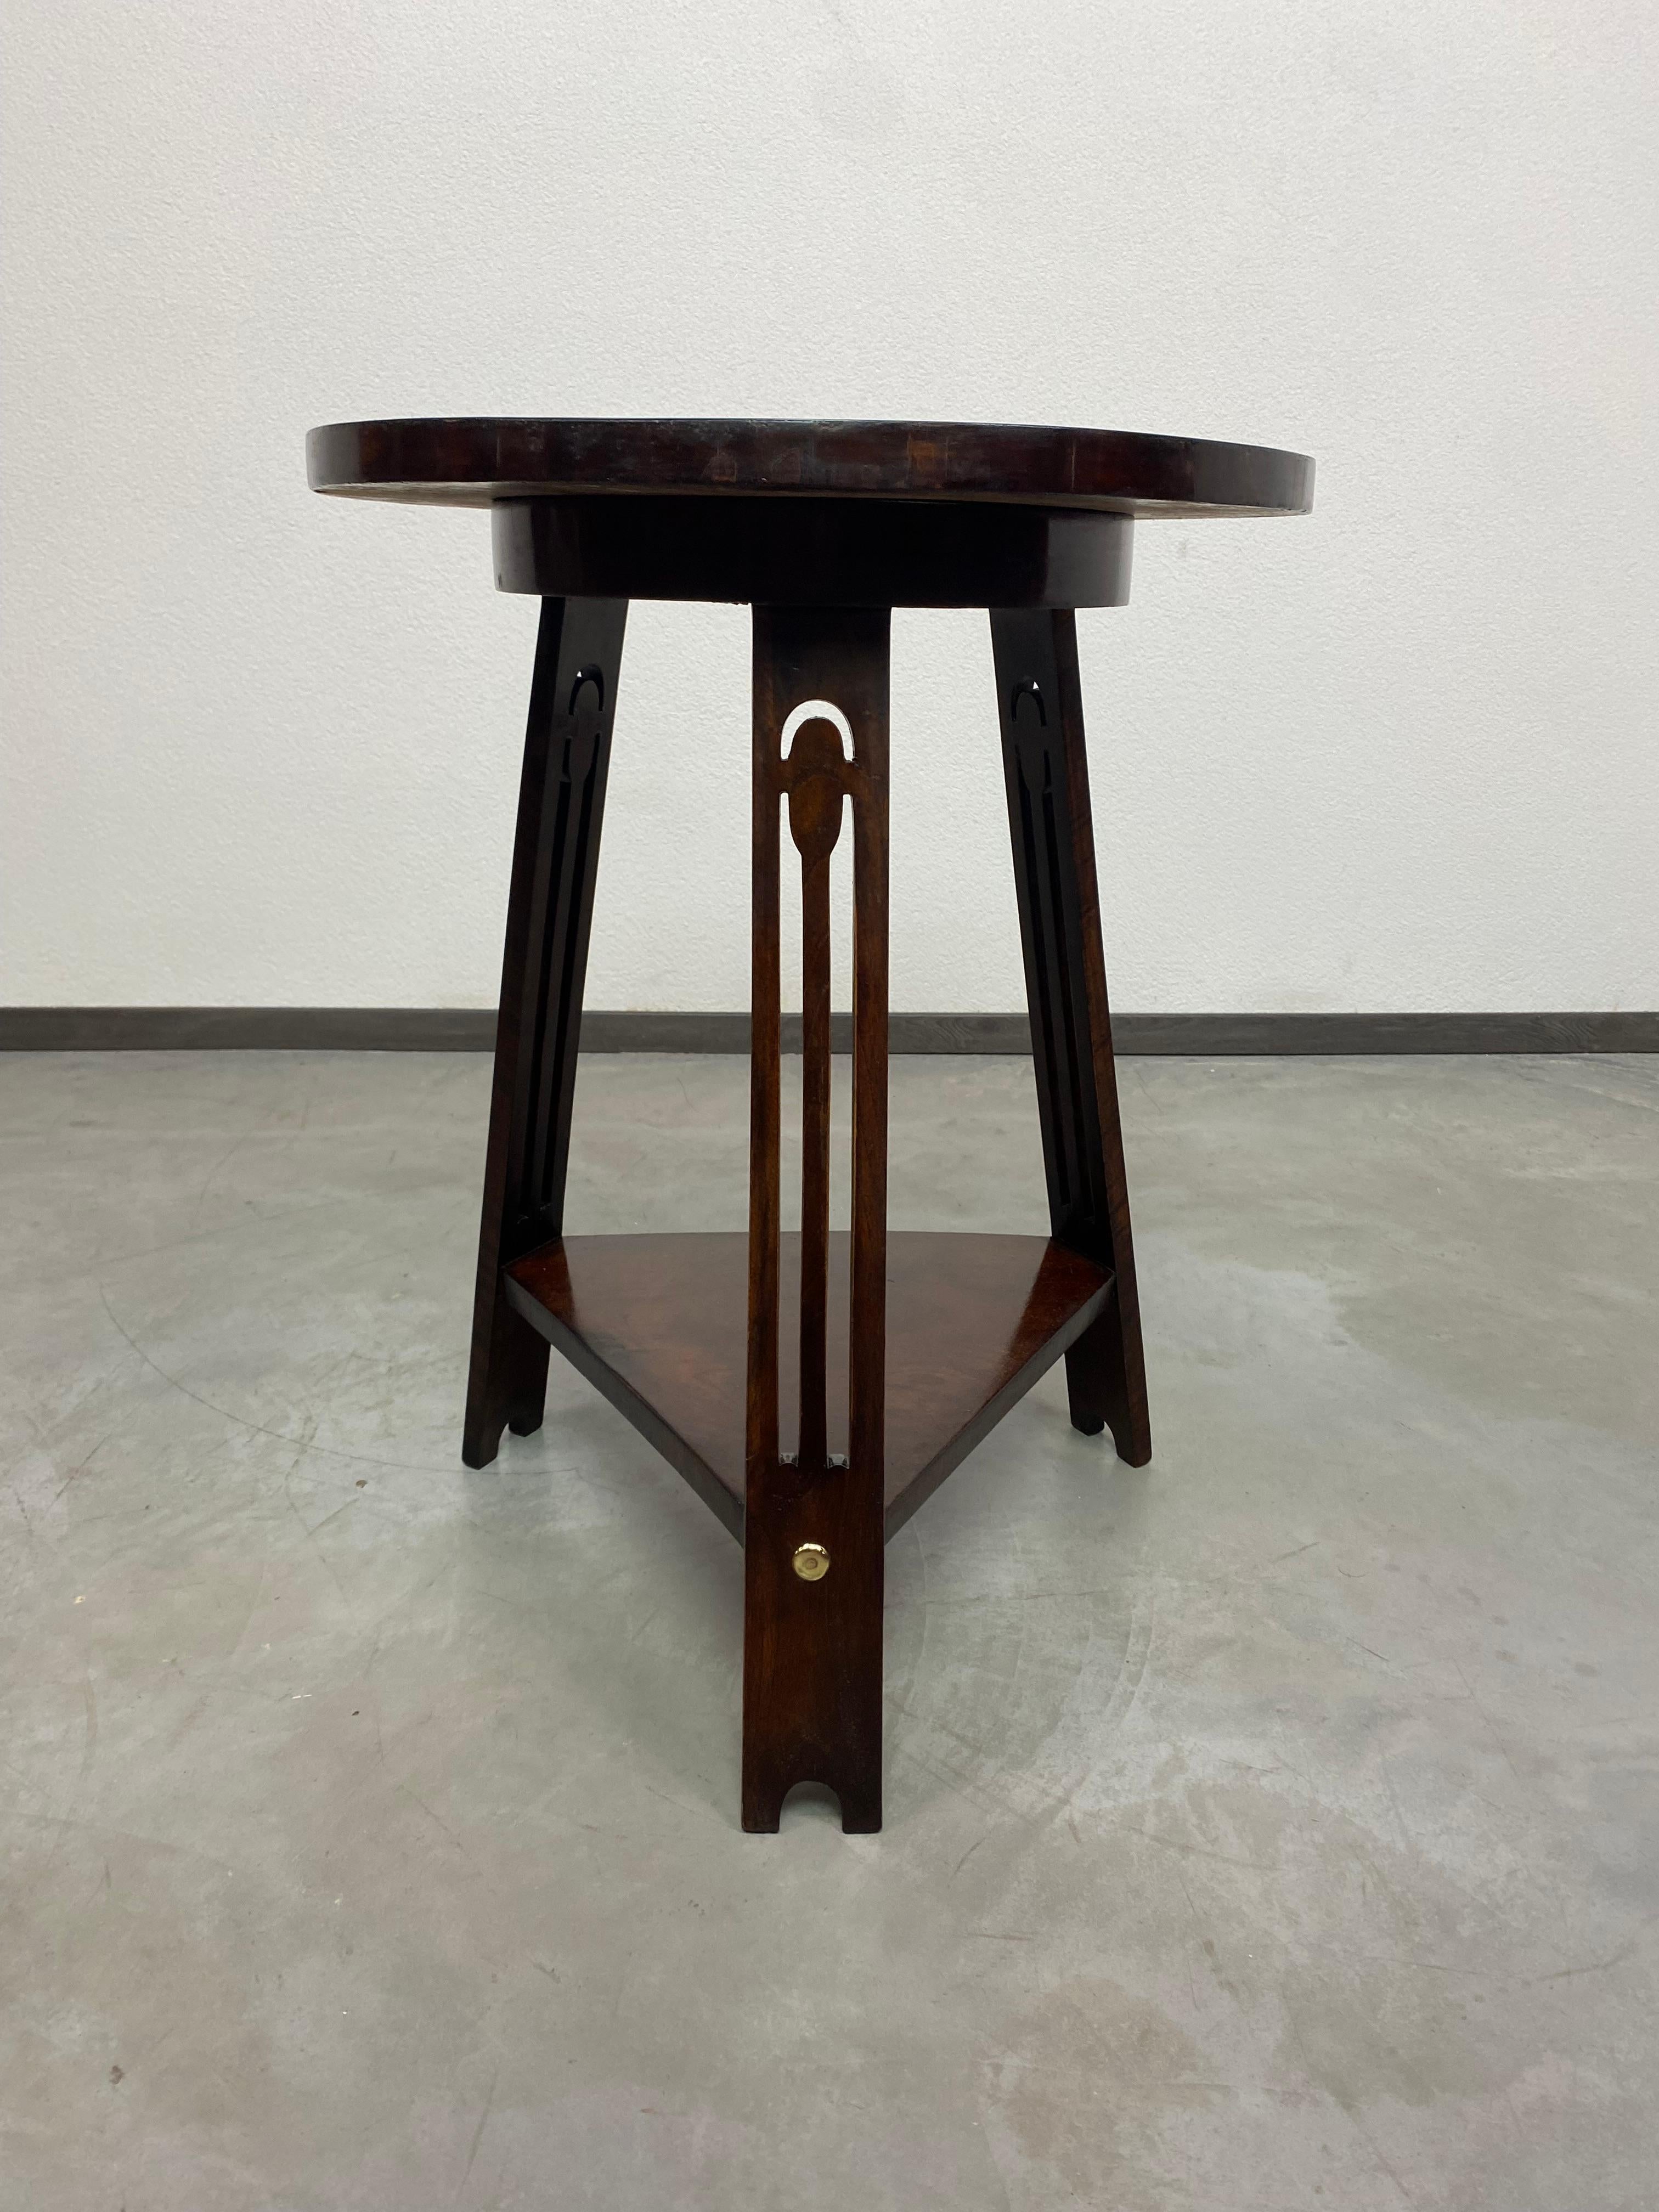 Jugendstil side table by Josph Maria Olbrich professionally stained and repolished.